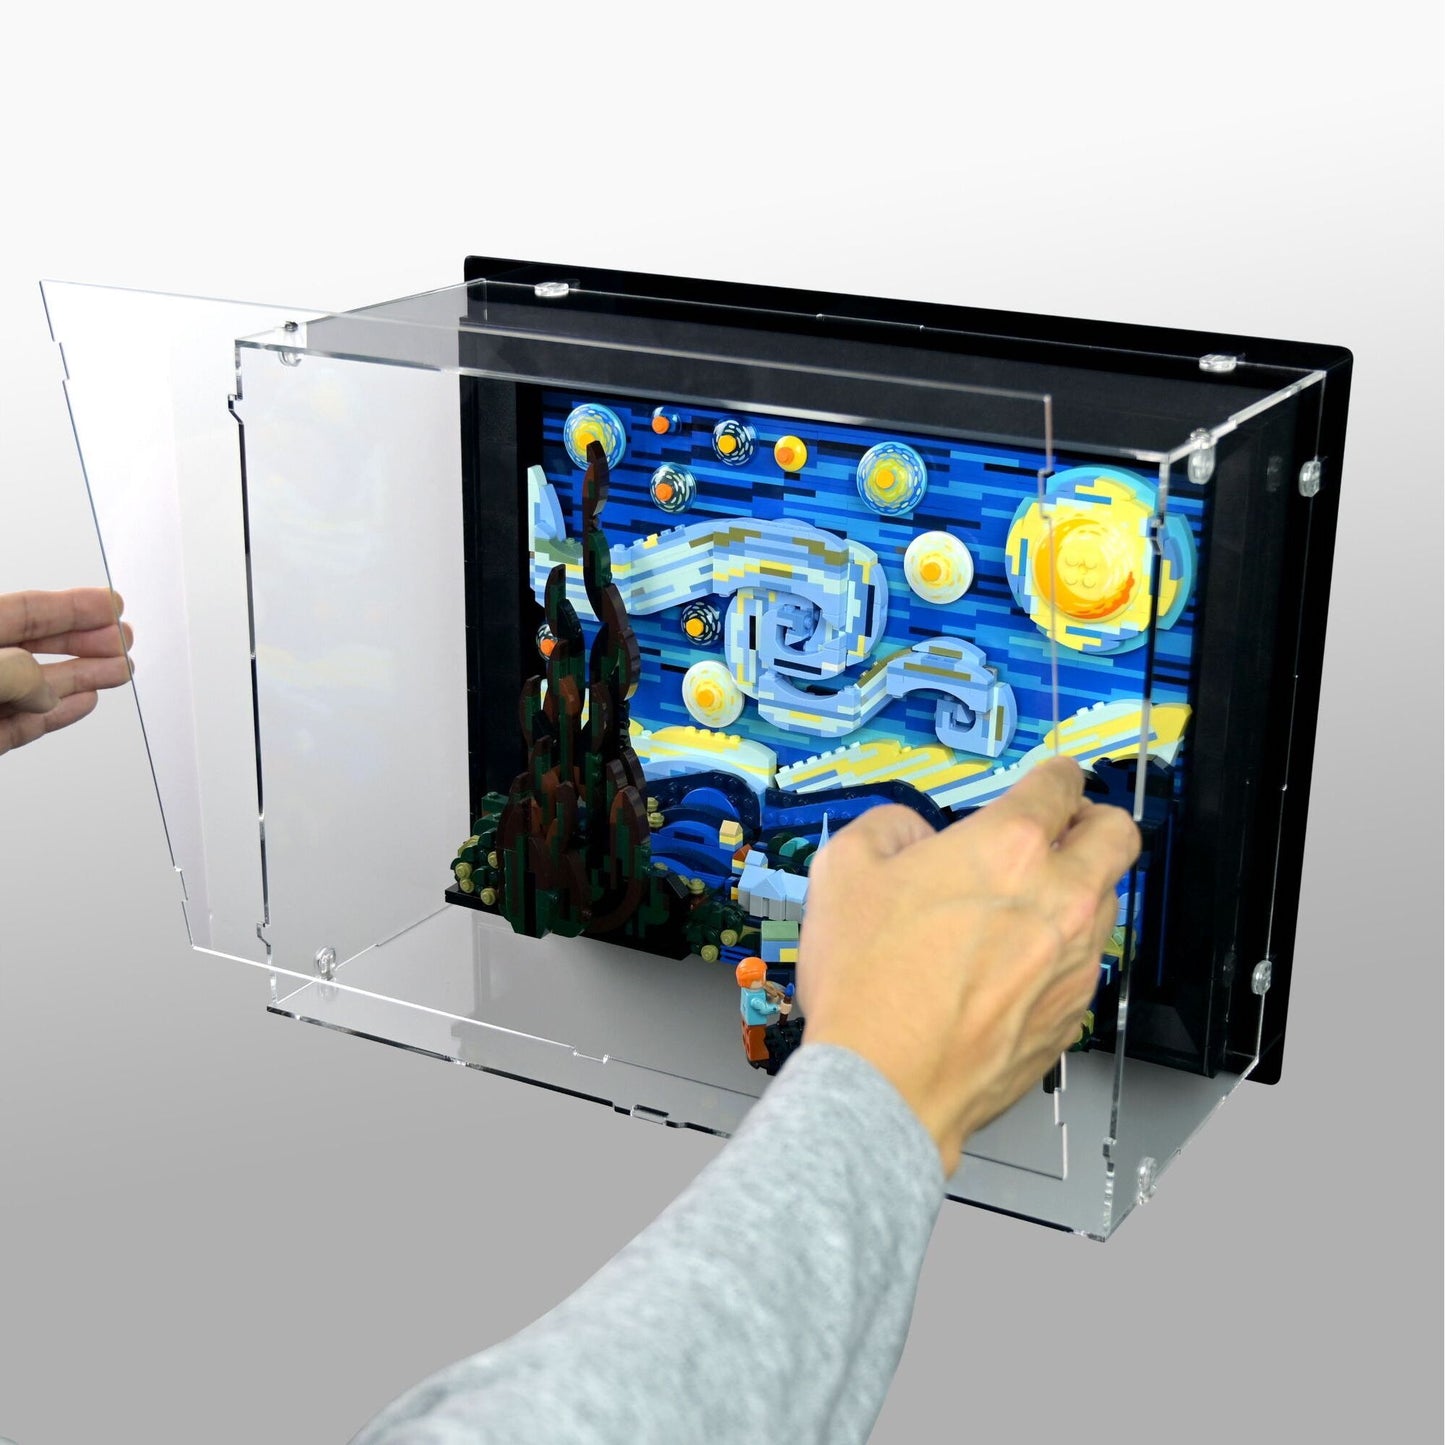 21333 Vincent van Gogh - The Starry Night Wall-Mounted Display Case